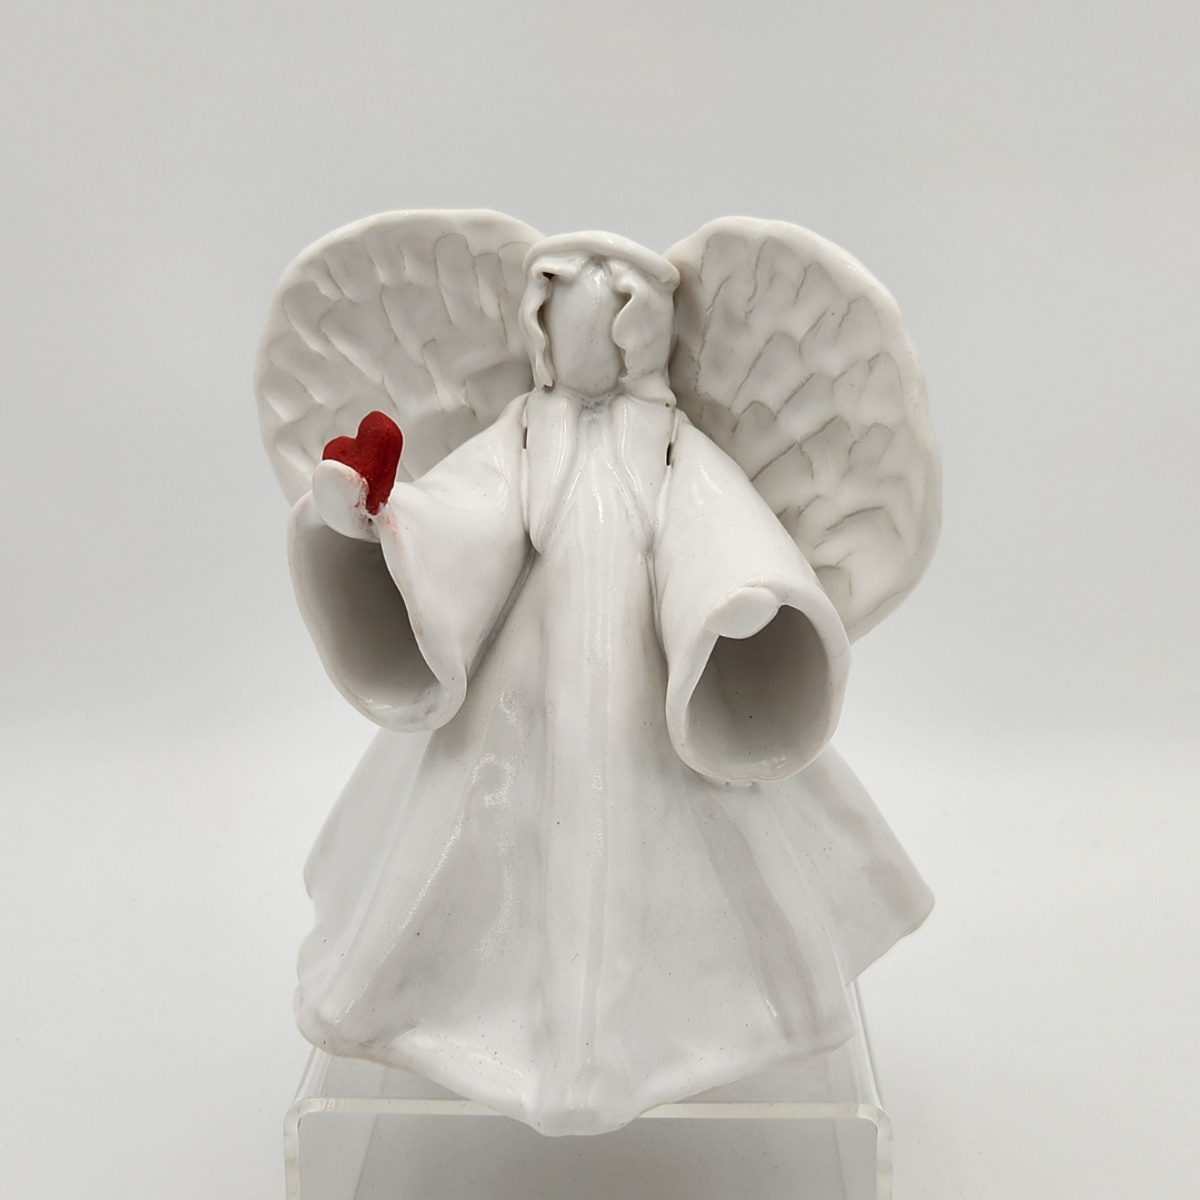 Medium Angel with Red Heart